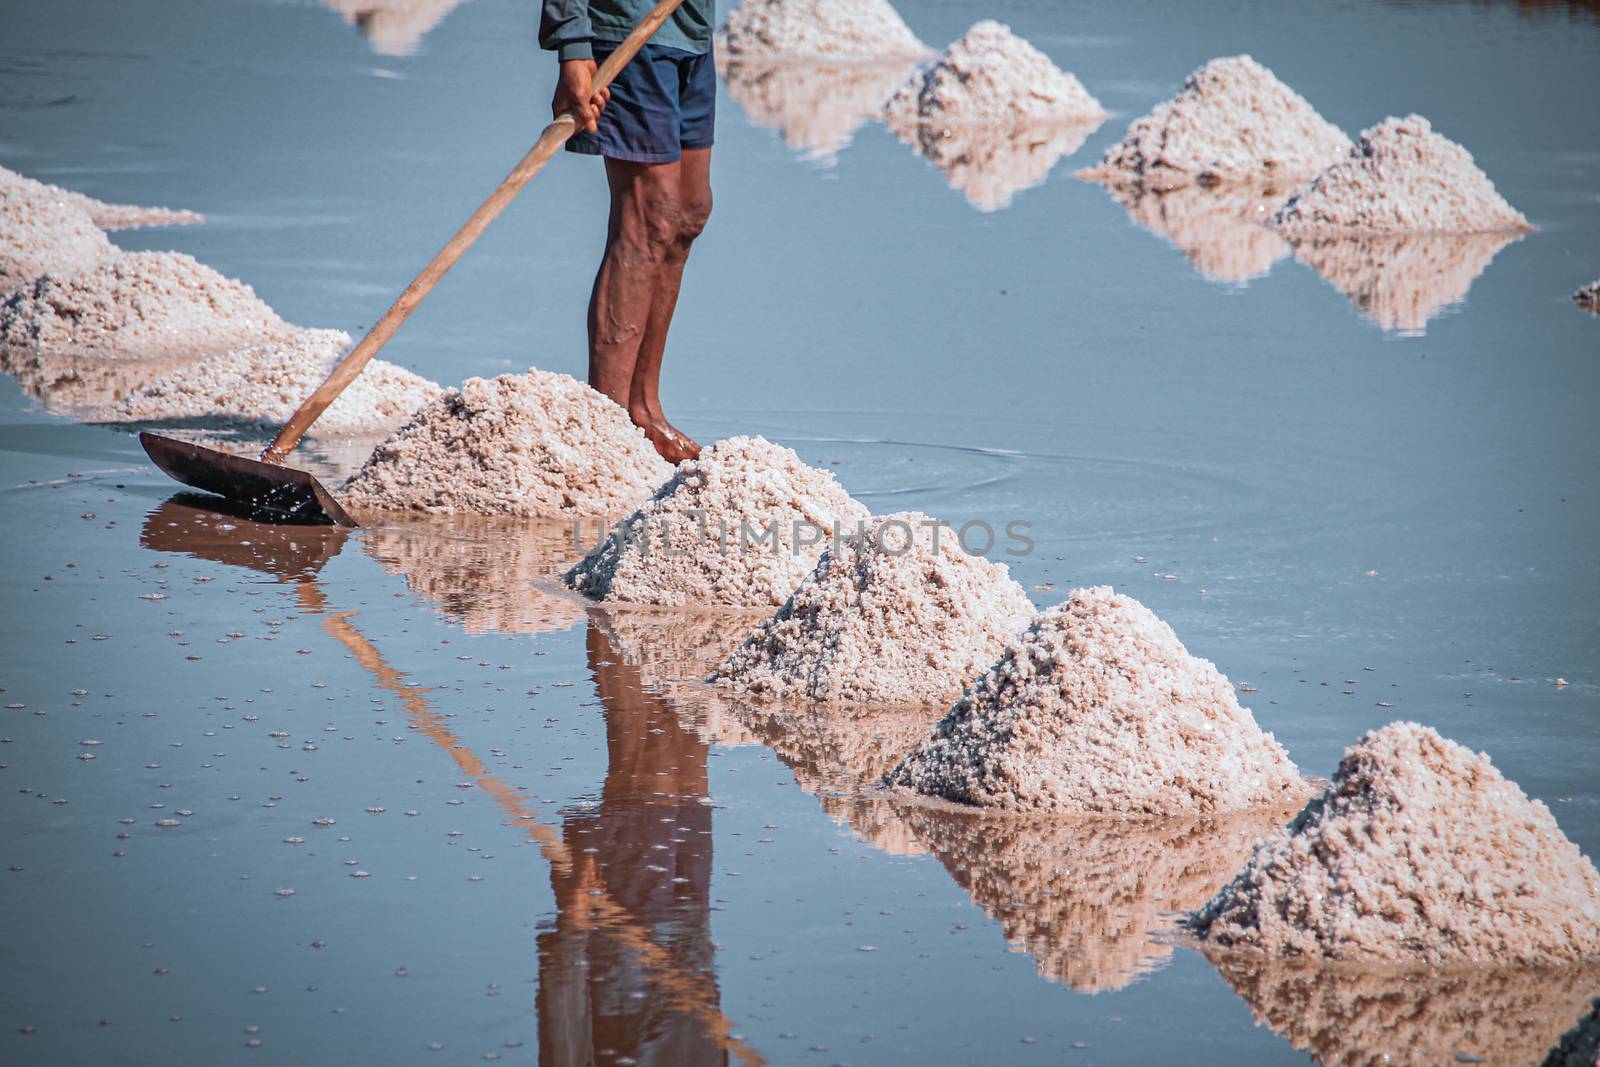 Cinematic photo of traditional harvesting of salt in Kampot Province in Cambodia that shows the local culture, livelihood and real life of the Khmer people